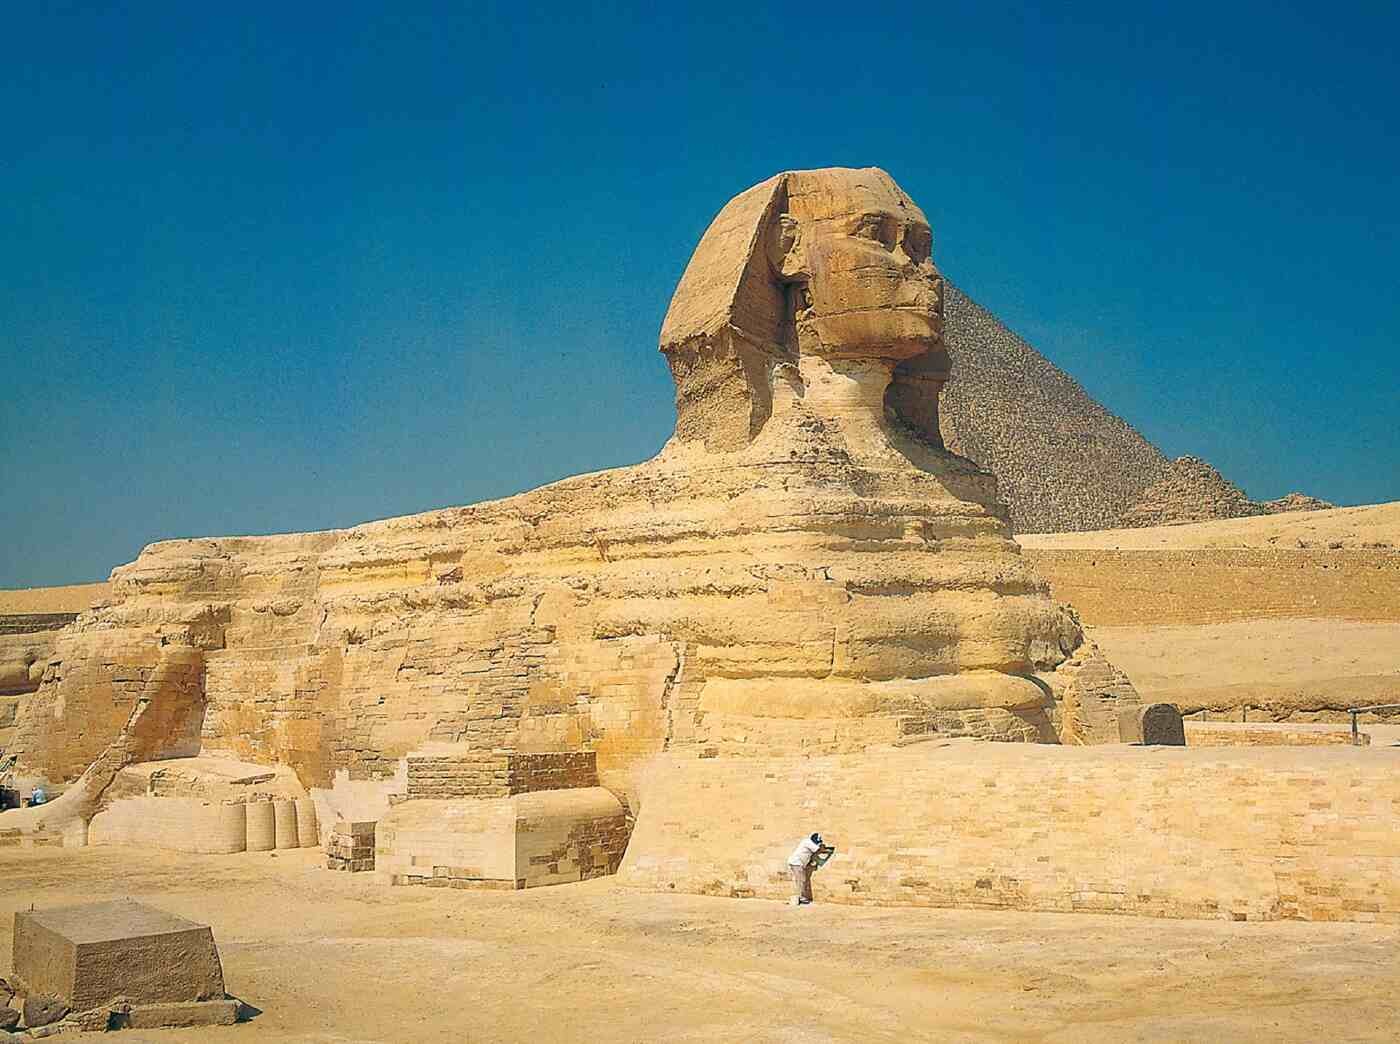 Why Was The Sphinx Built?